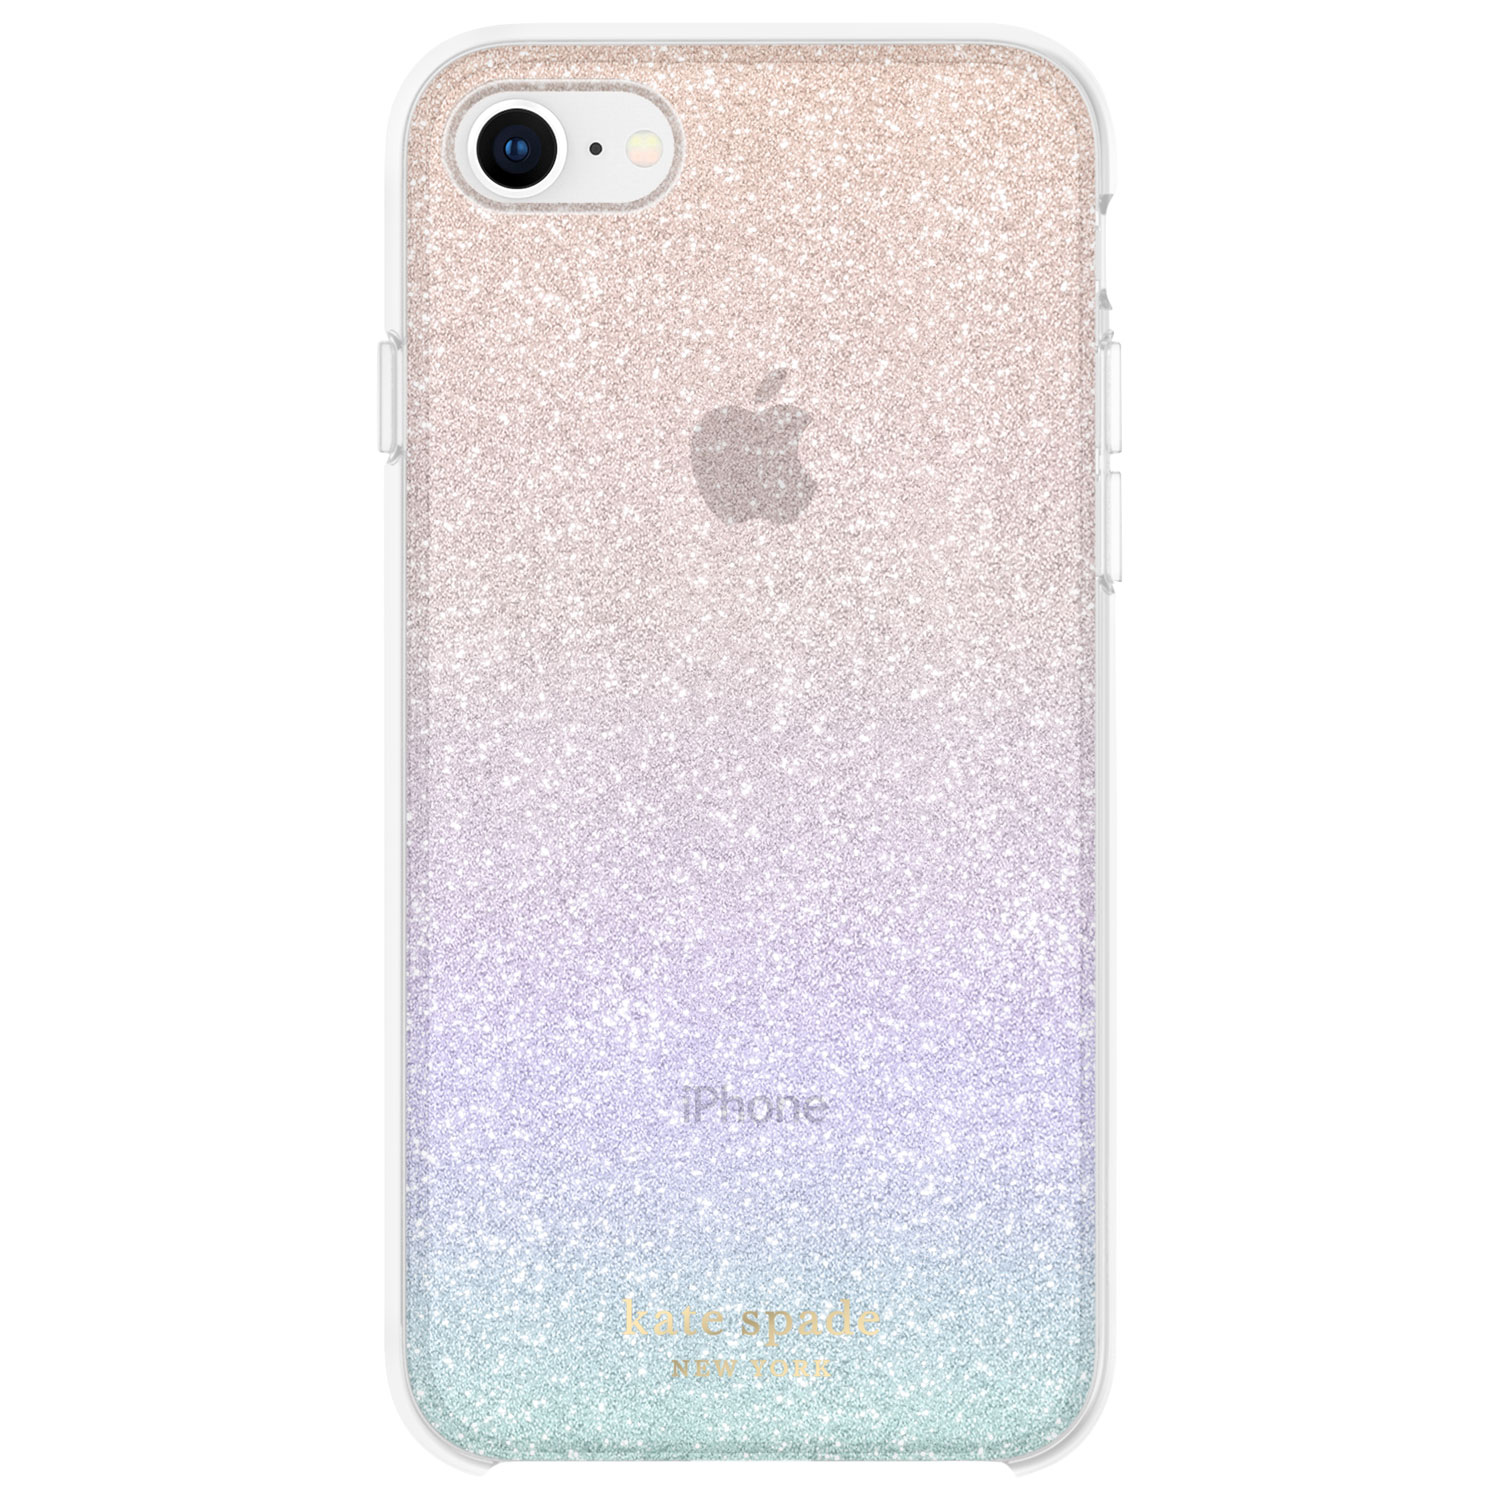 kate spade new york Fitted Hard Shell Case for iPhone SE (3rd Gen/2nd Gen) - Glitter